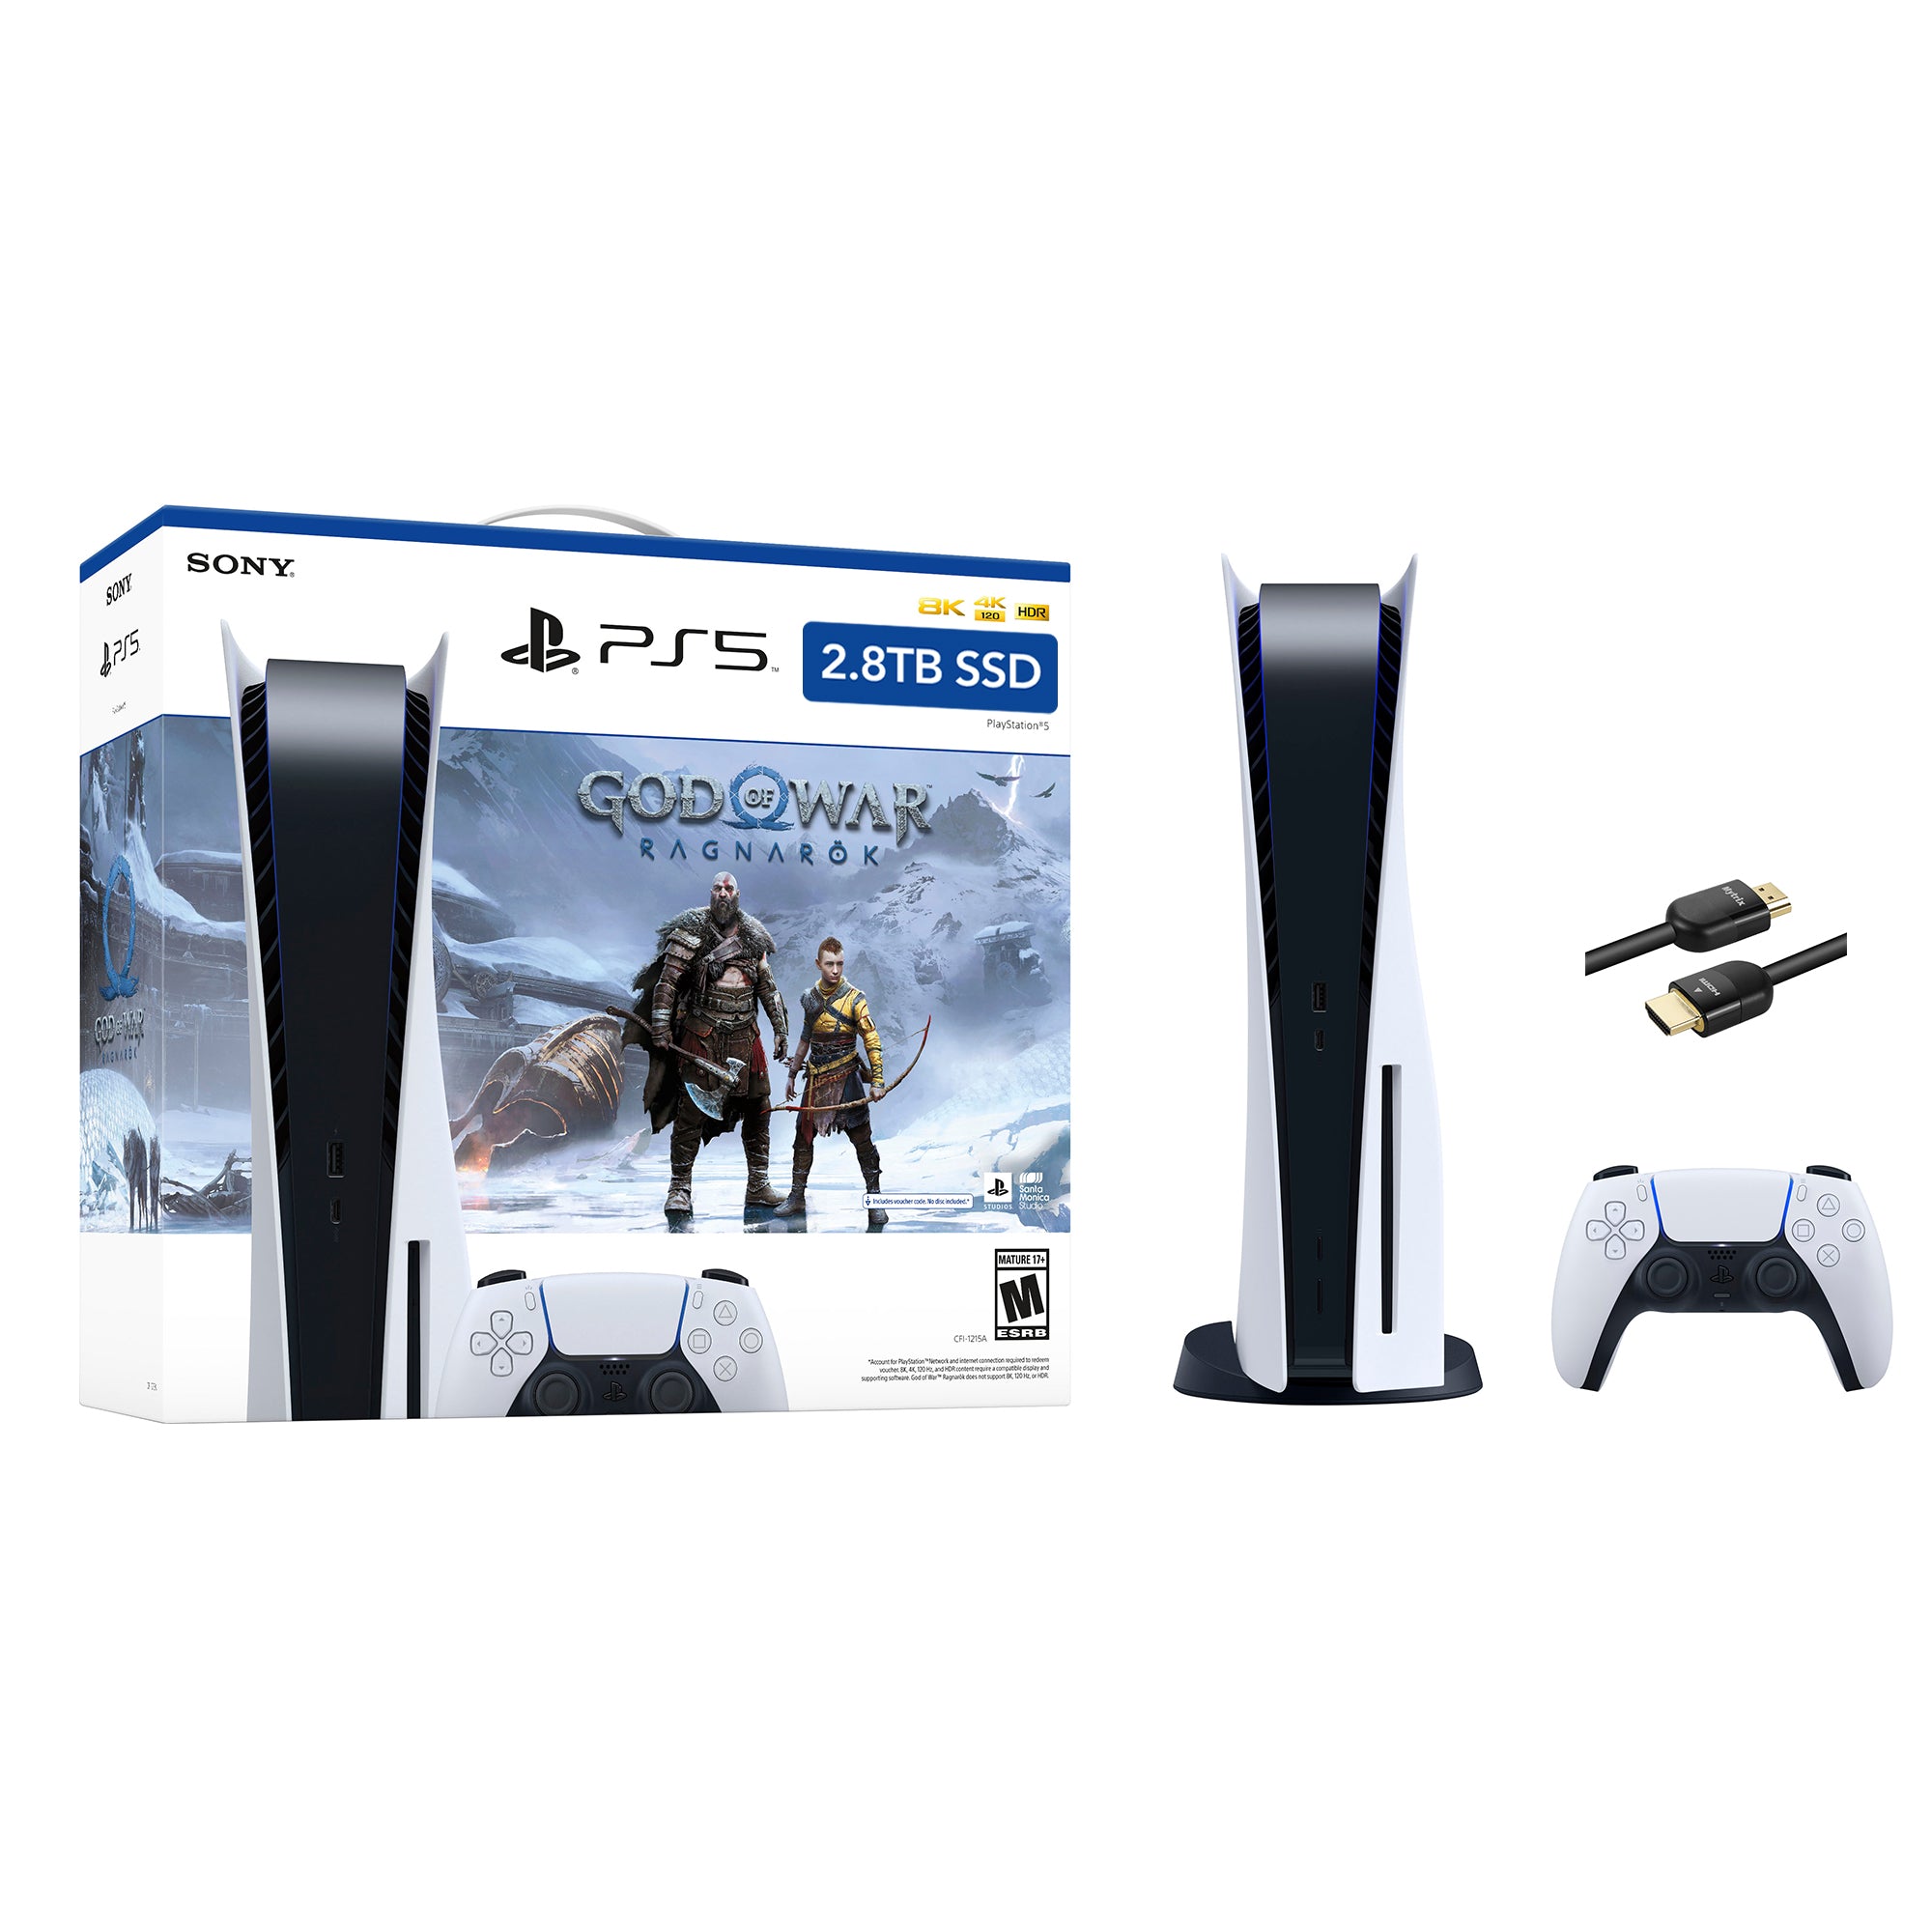 PlayStation 5 Upgraded 2.8TB Disc Edition God of War Ragnarok Bundle and Mytrix 8K HDMI Ultra High Speed Cable - White, PS5 Gaming Console